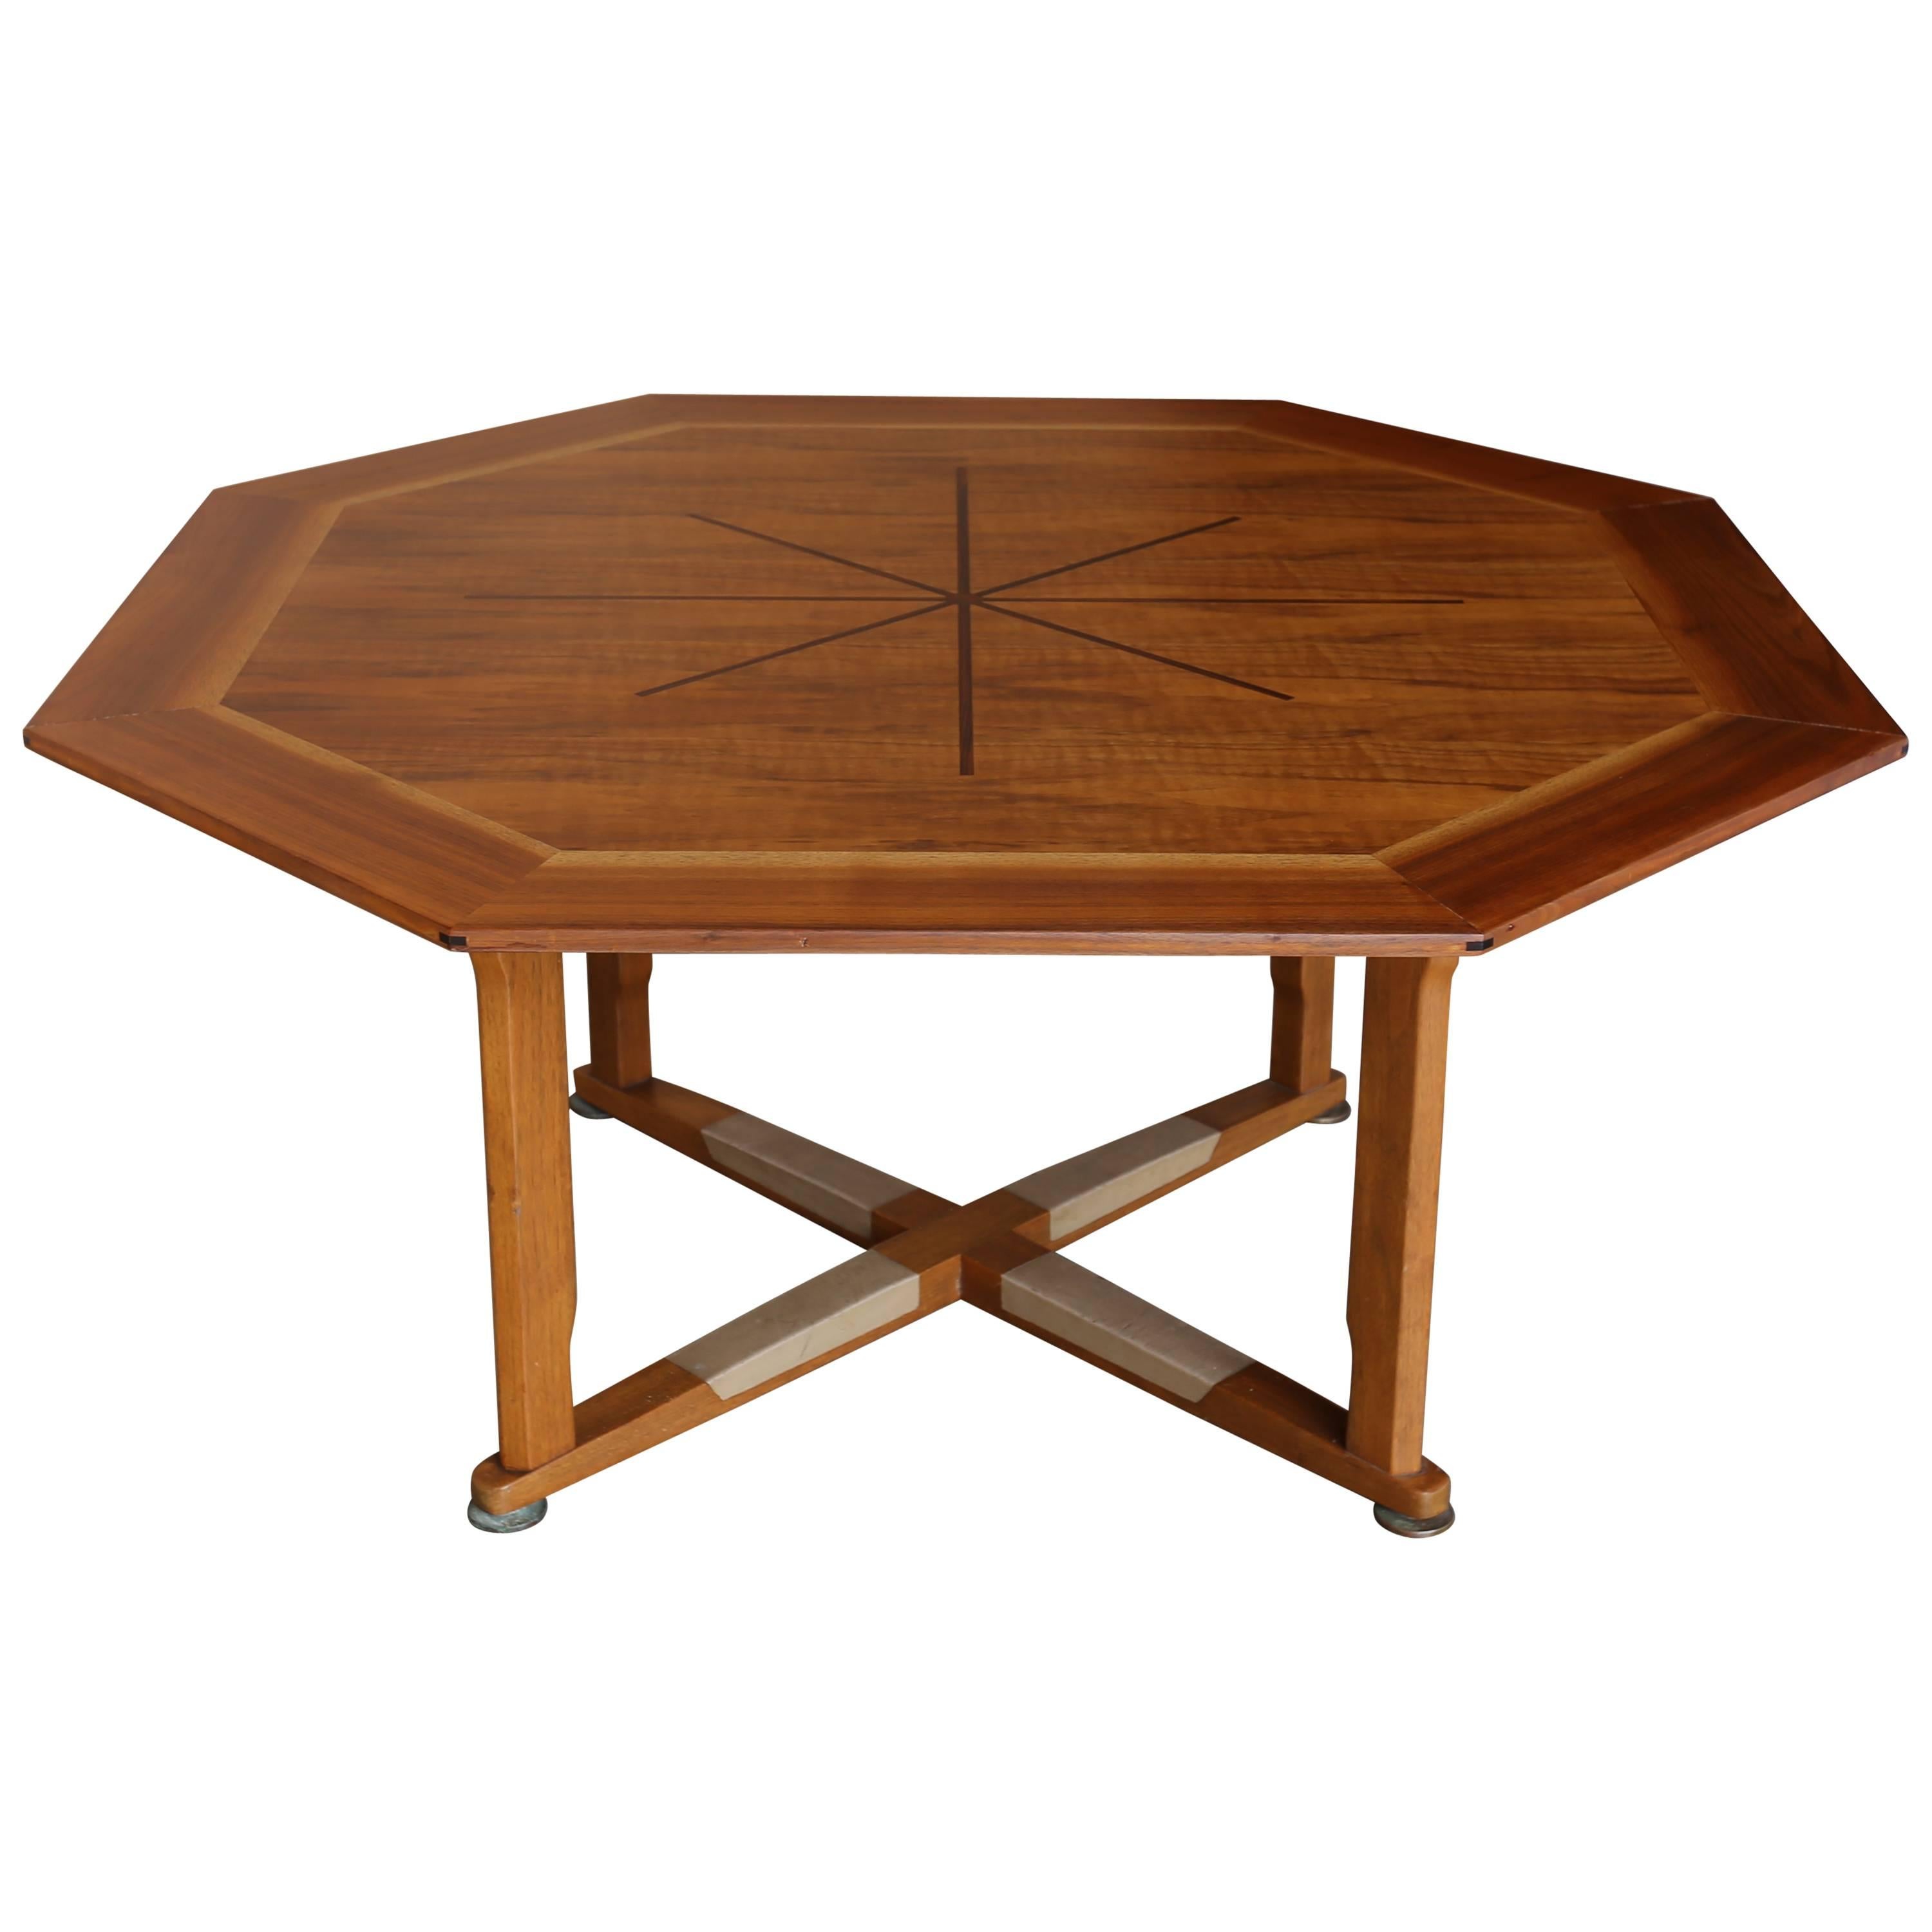 'Janus' Game Table by Edward Wormley for Dunbar